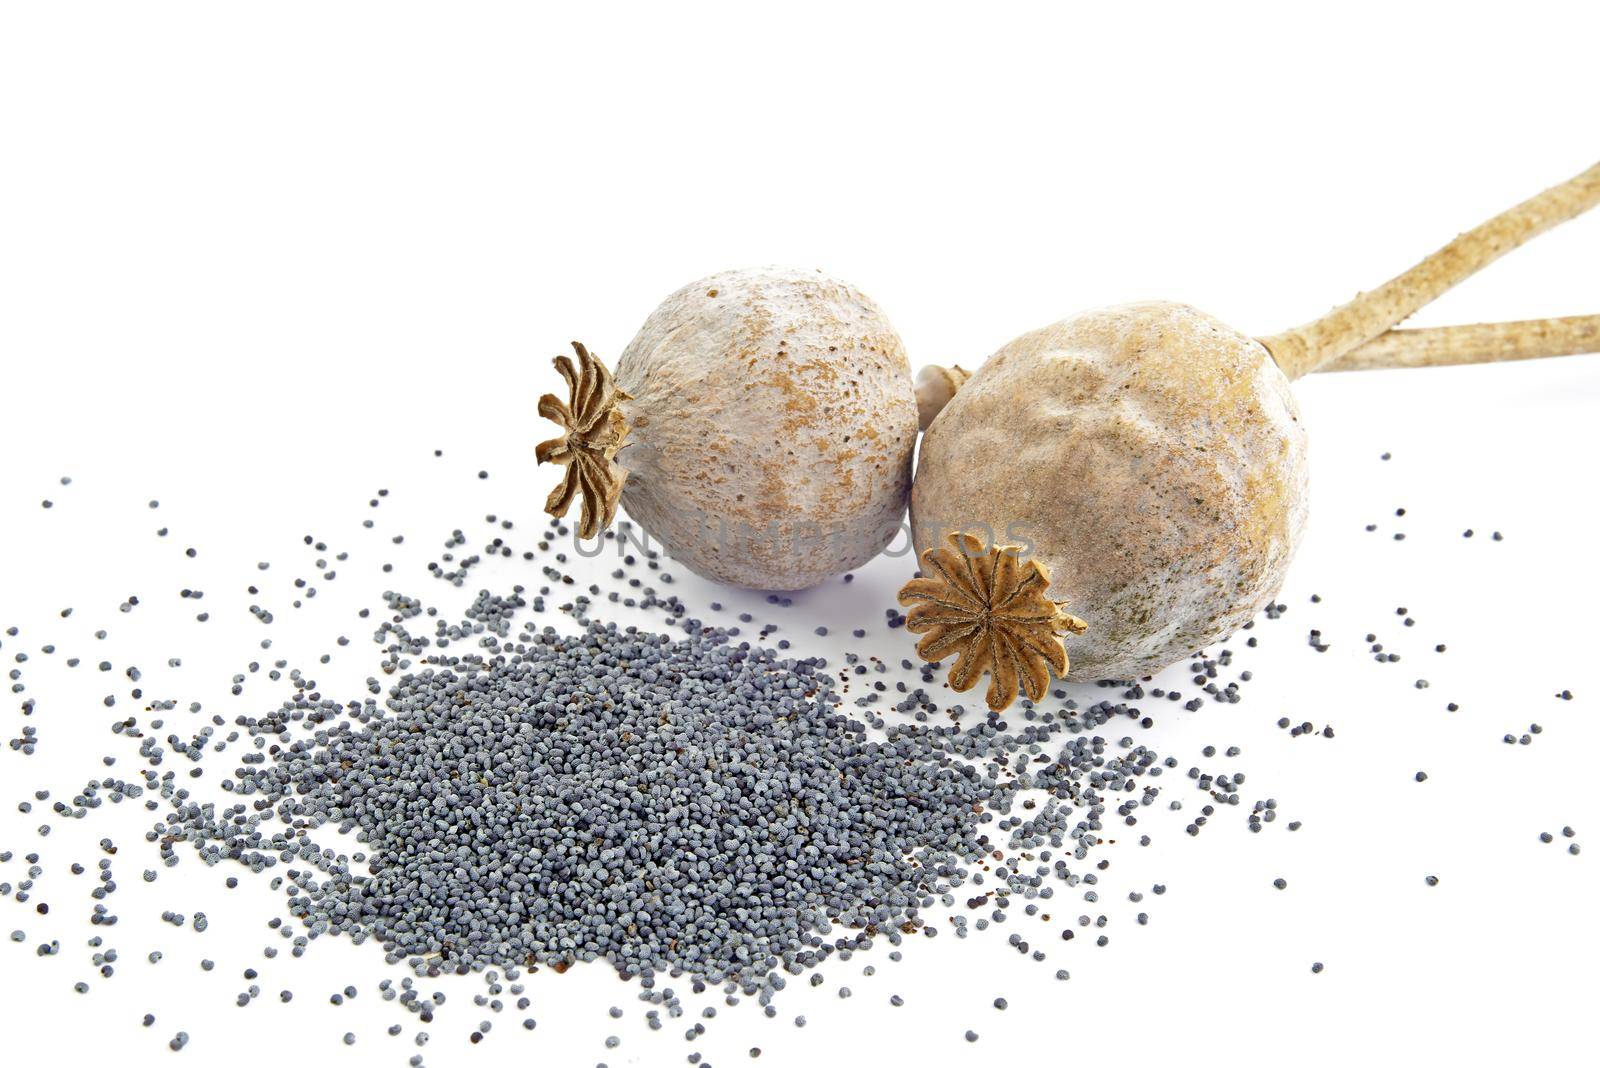 Two poppy seeds on a white background